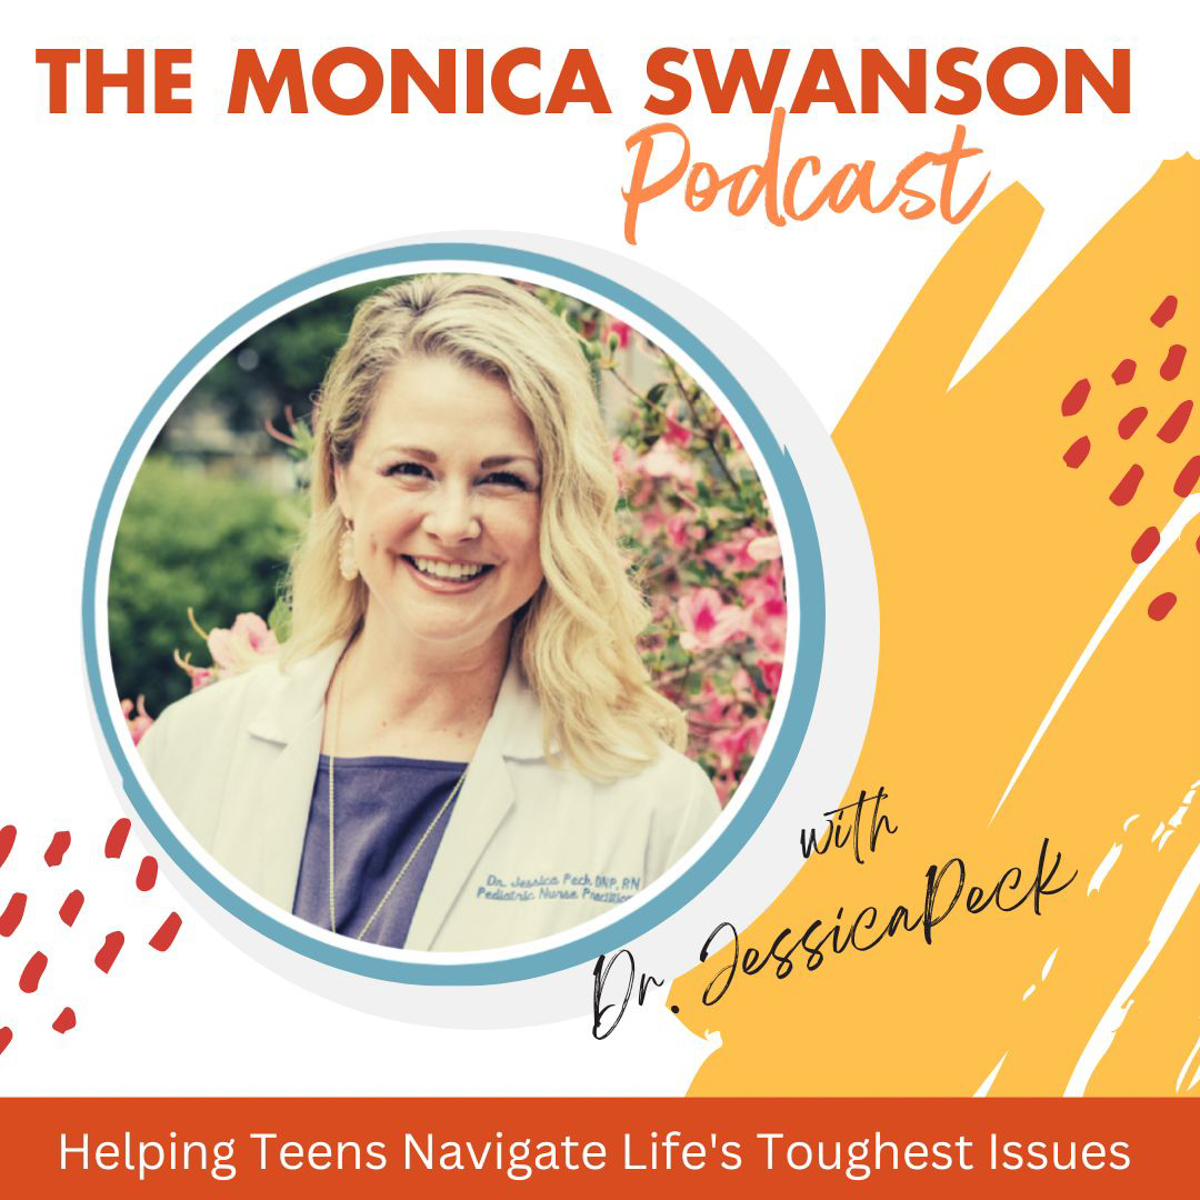 Helping Teens Navigate Through Life’s Toughest Issues, with Dr. Jessica Peck